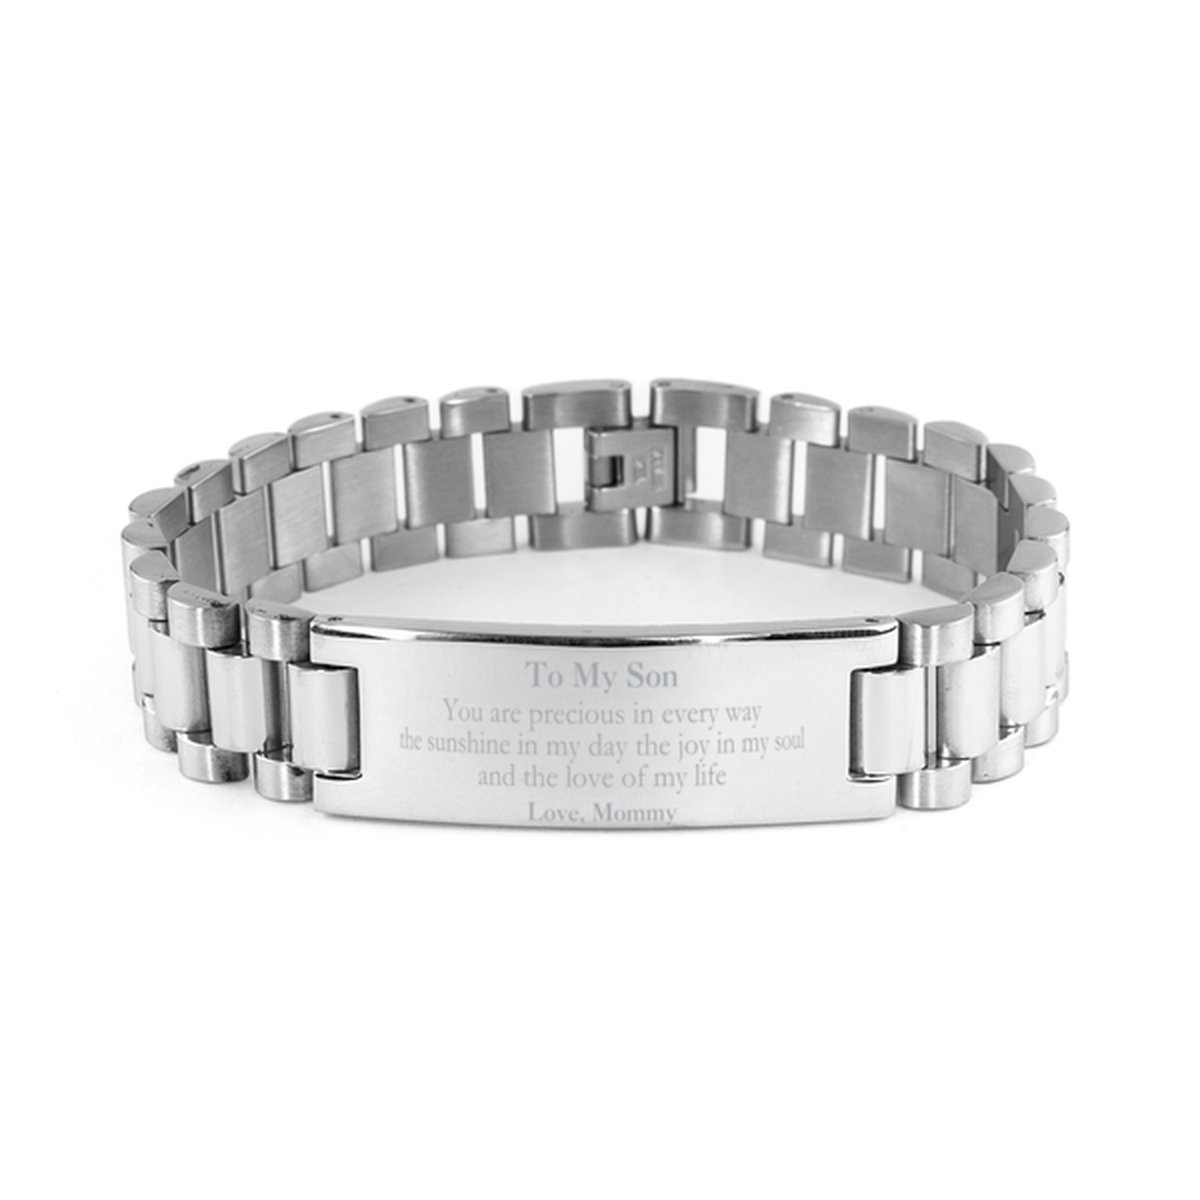 Graduation Gifts for Son Ladder Stainless Steel Bracelet Present from Mommy, Christmas Son Birthday Gifts Son You are precious in every way the sunshine in my day. Love, Mommy